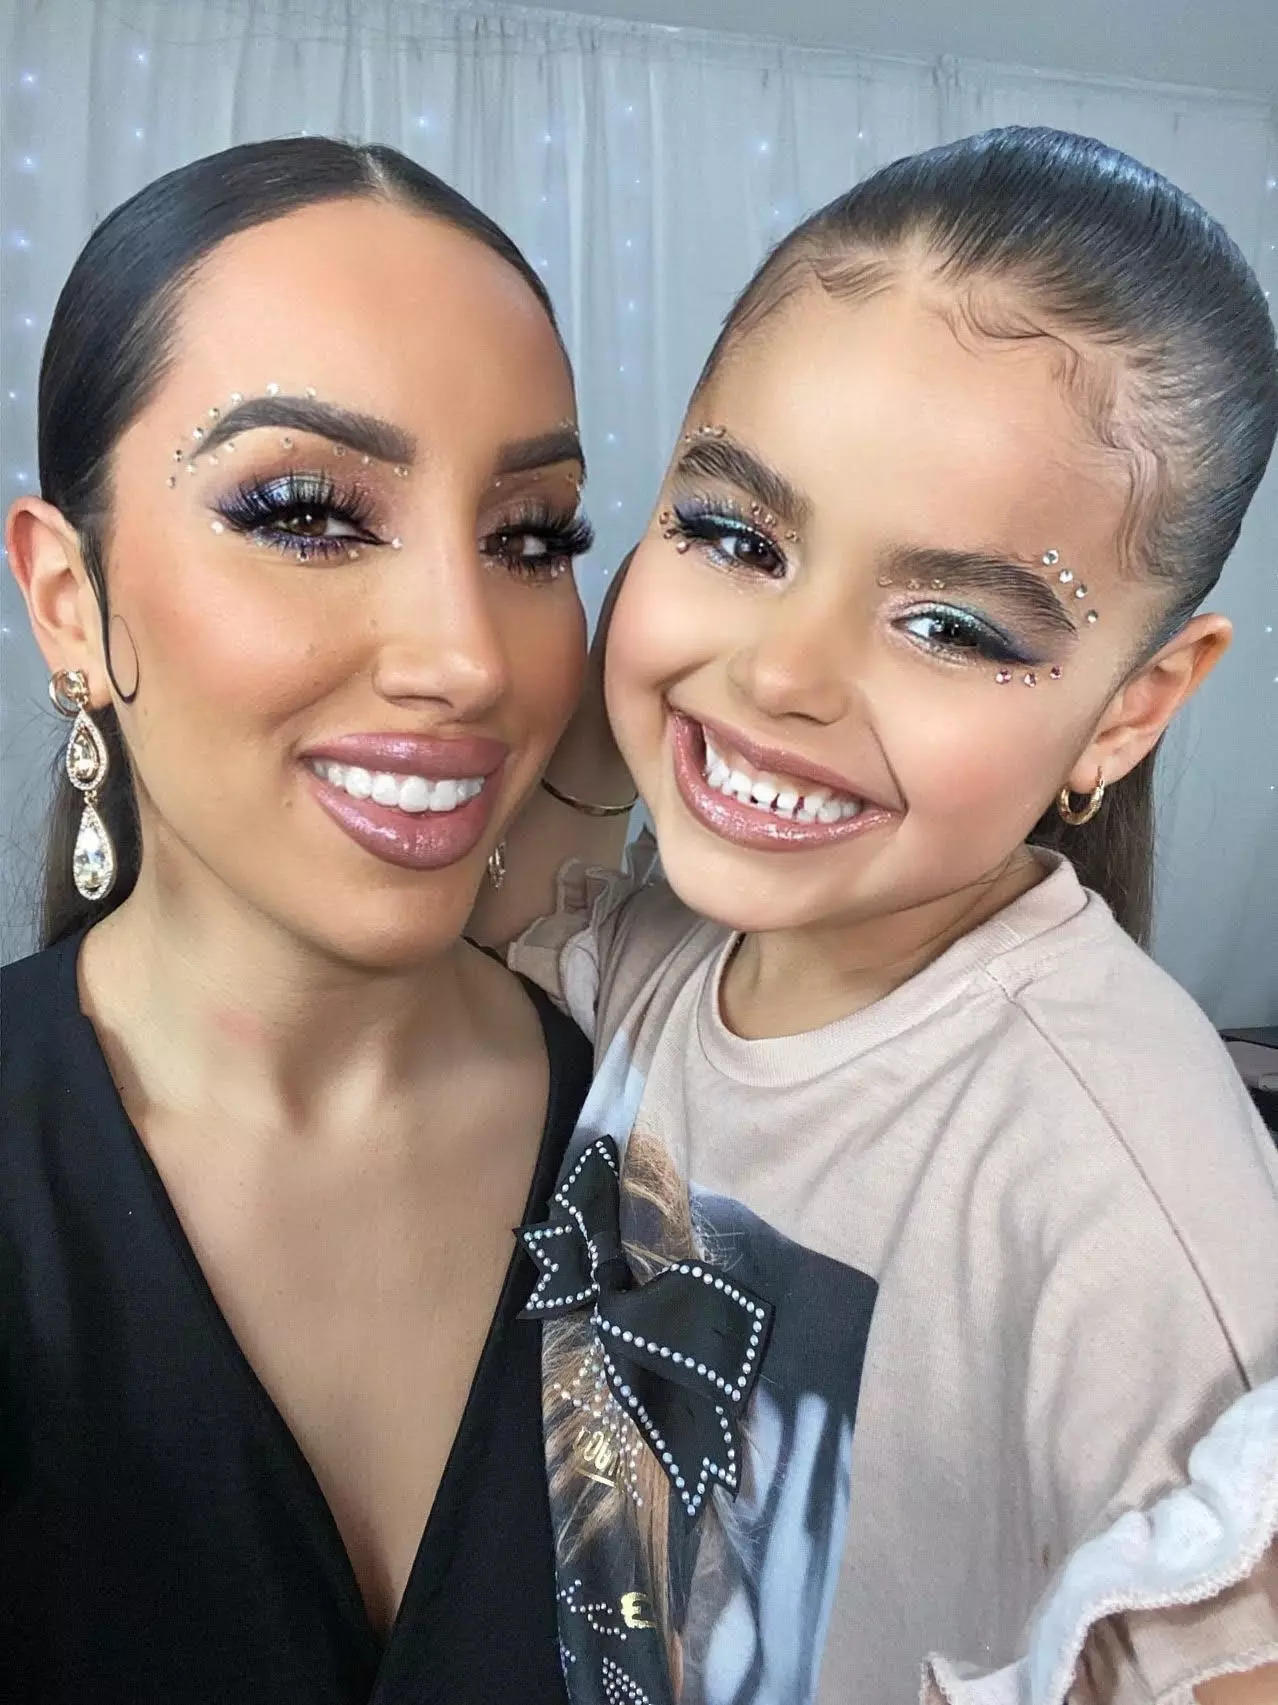 A 6 -year -old TikTok makeup artist along with fans including Huda Kattan and Fenty Beauty is going viral for making an appearance with her mother